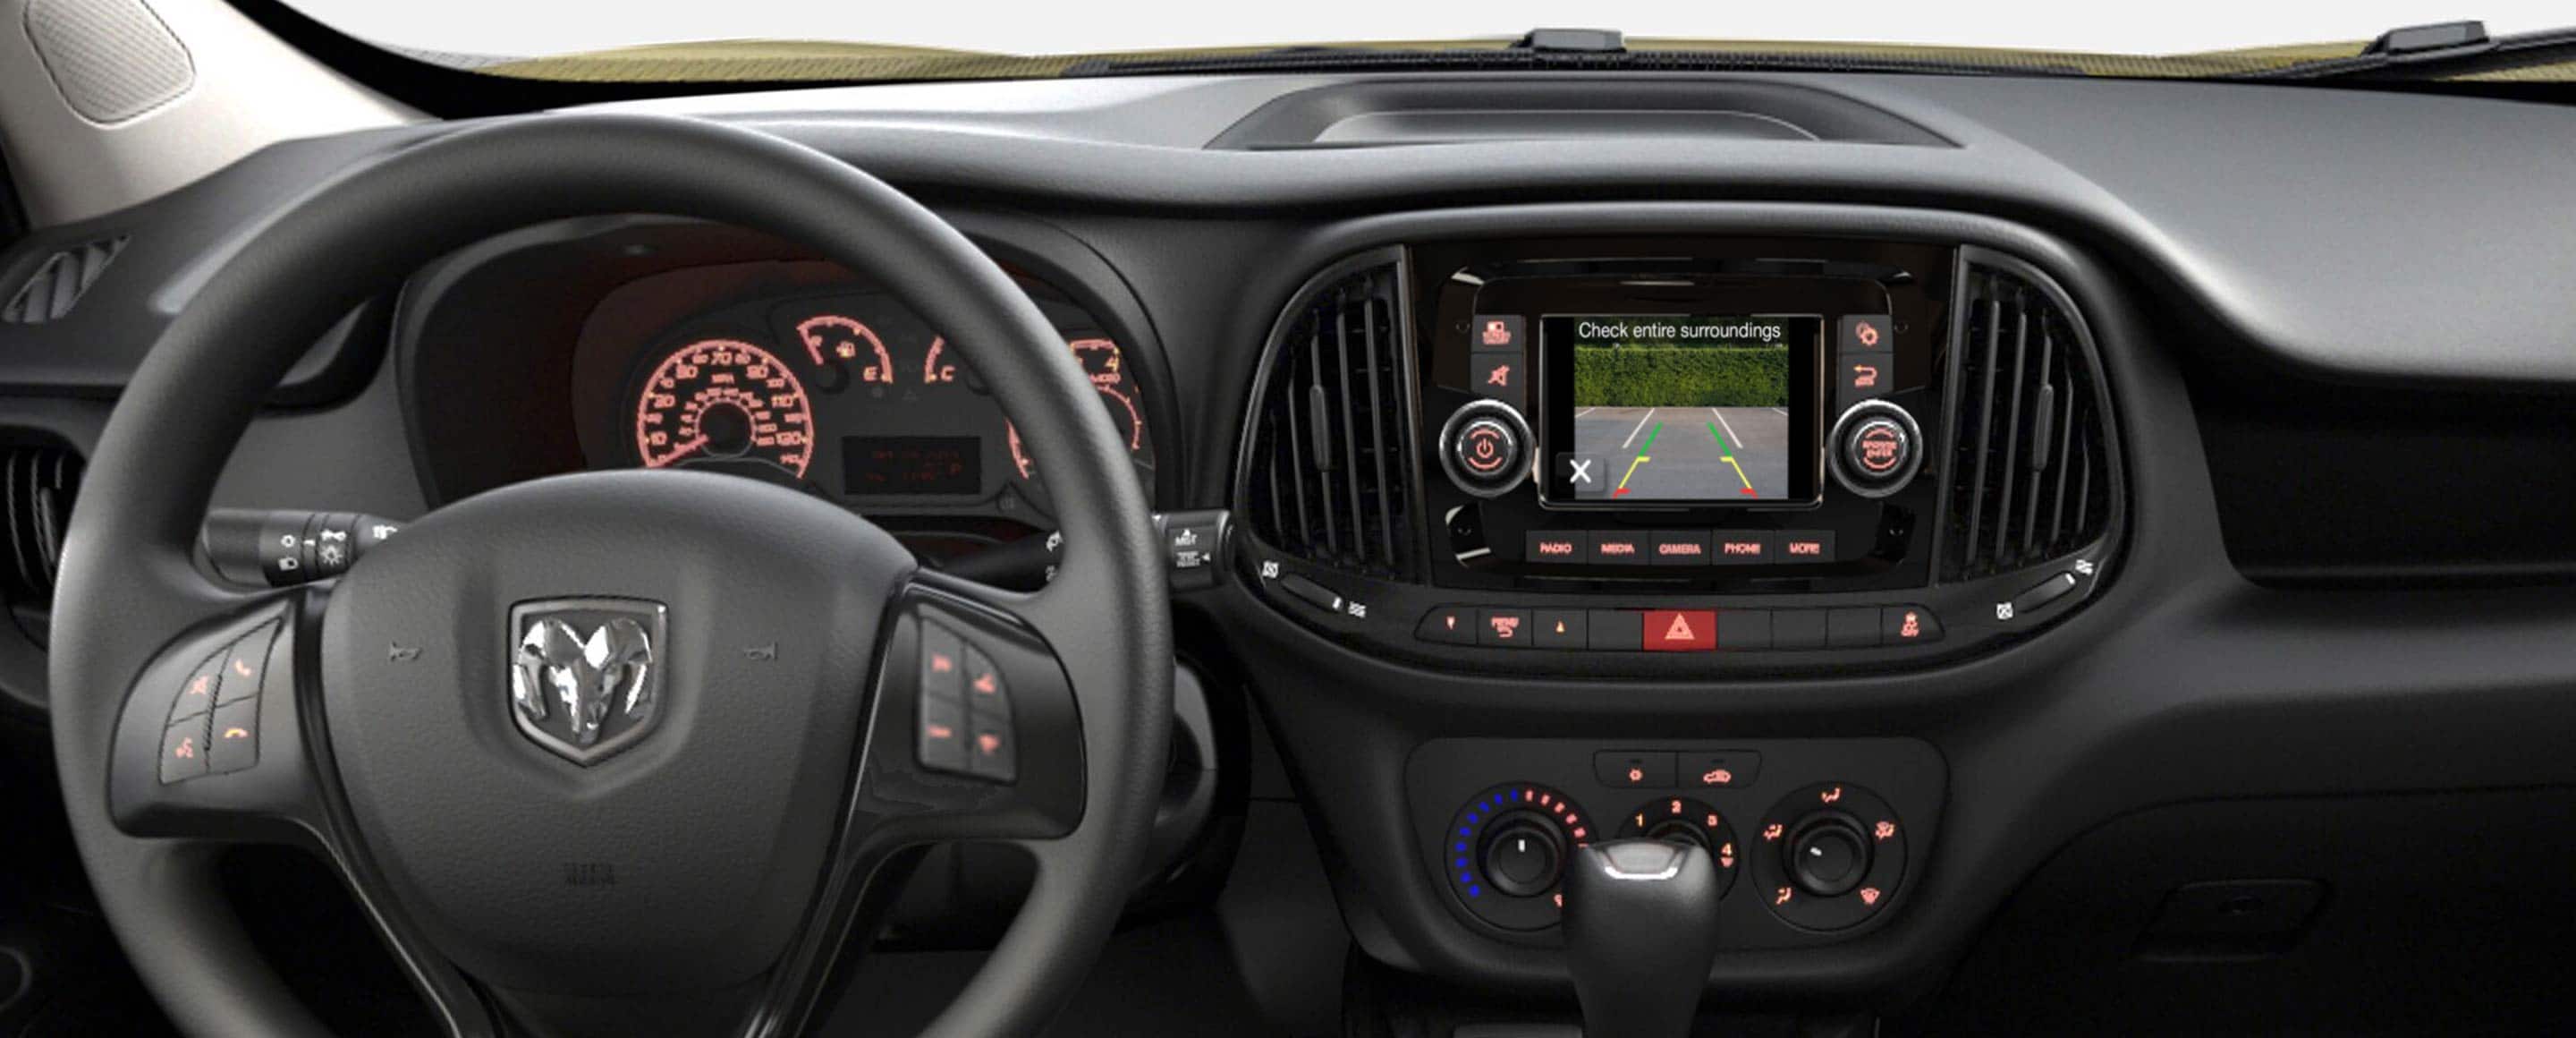 The touchscreen in the 2022 Ram ProMaster City, displaying the area behind the vehicle with overlaid guidelines showing the vehicle's path.